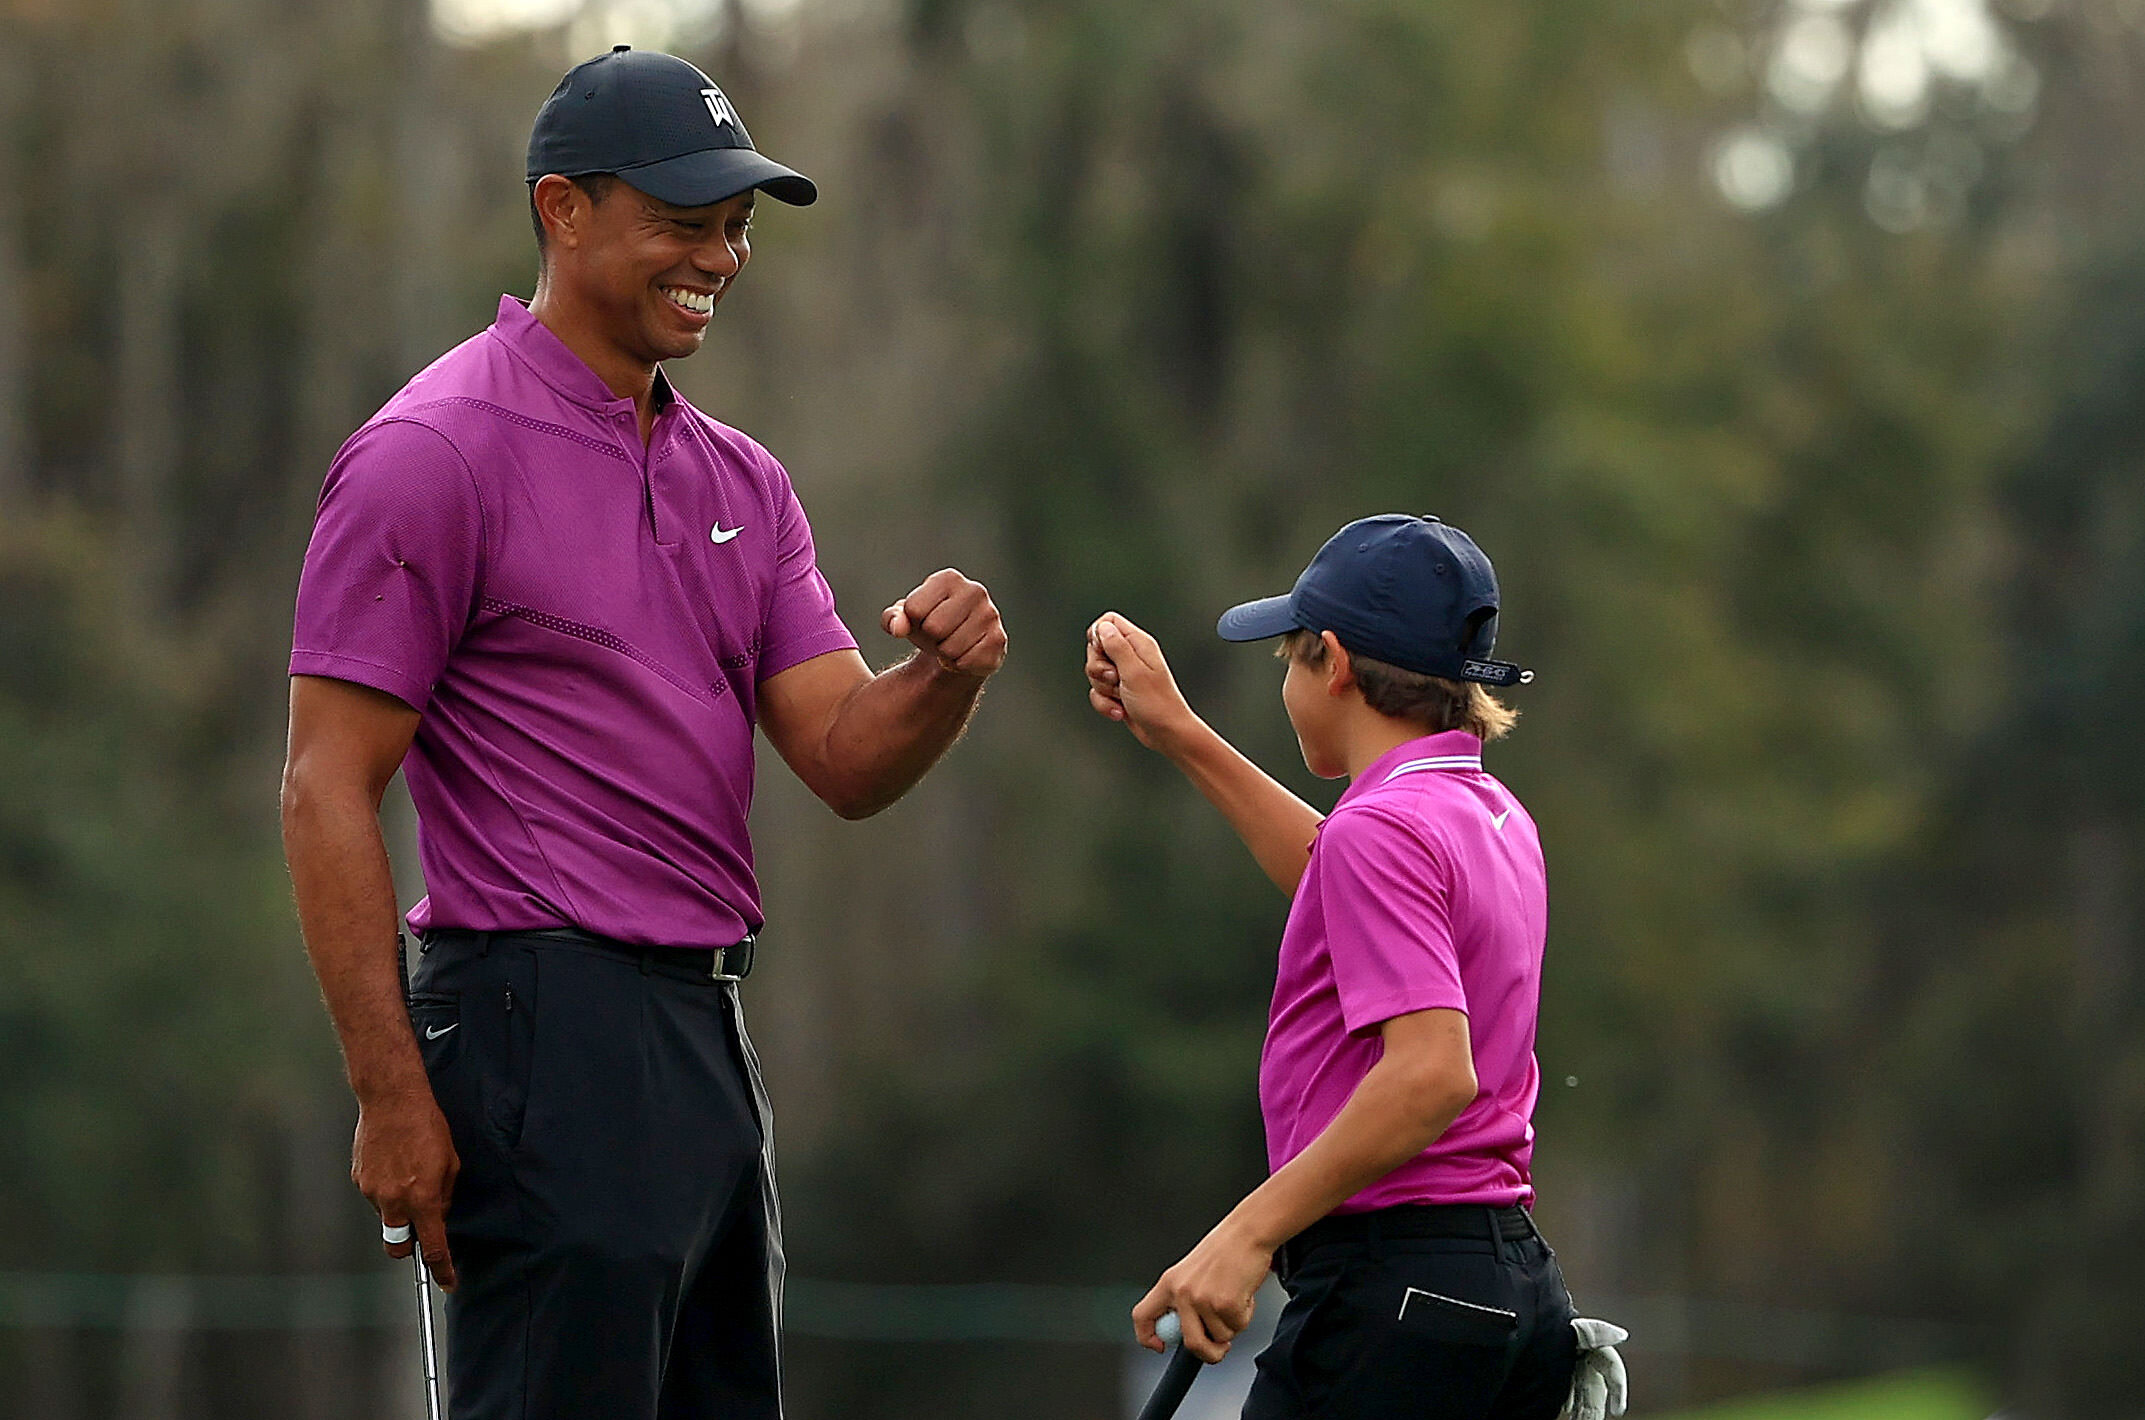  ORLANDO, FLORIDA - DECEMBER 19: Tiger Woods of the United States and son Charlie Woods high five after a birdie on the ninth hole during the first round of the PNC Championship at the Ritz Carlton Golf Club on December 19, 2020 in Orlando, Florida. 